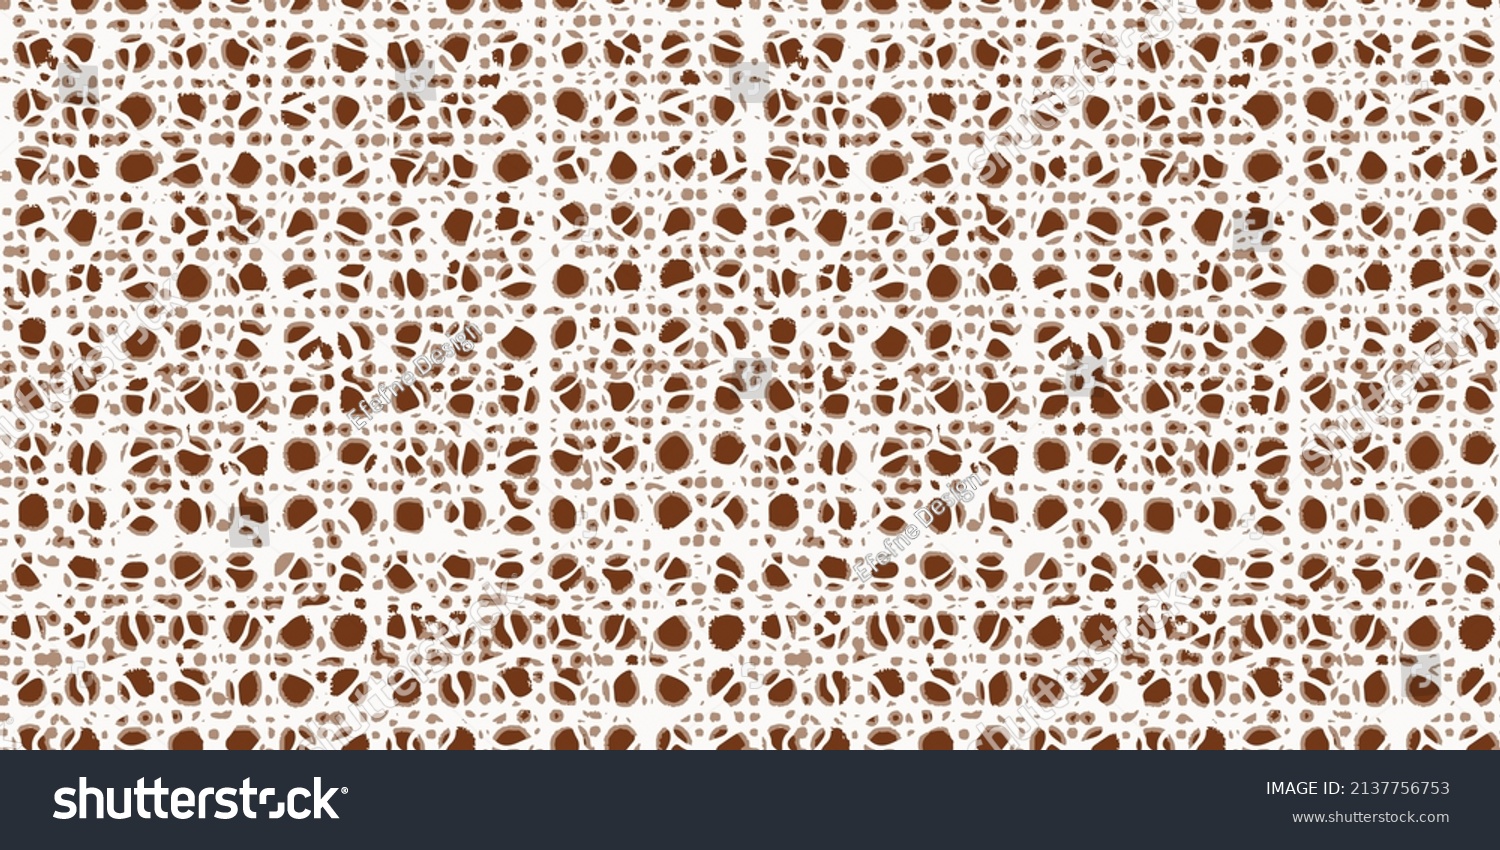 SVG of Worn brown  cane webbing illustration vector  wood texture surface , rattan geometric seamless pattern. svg